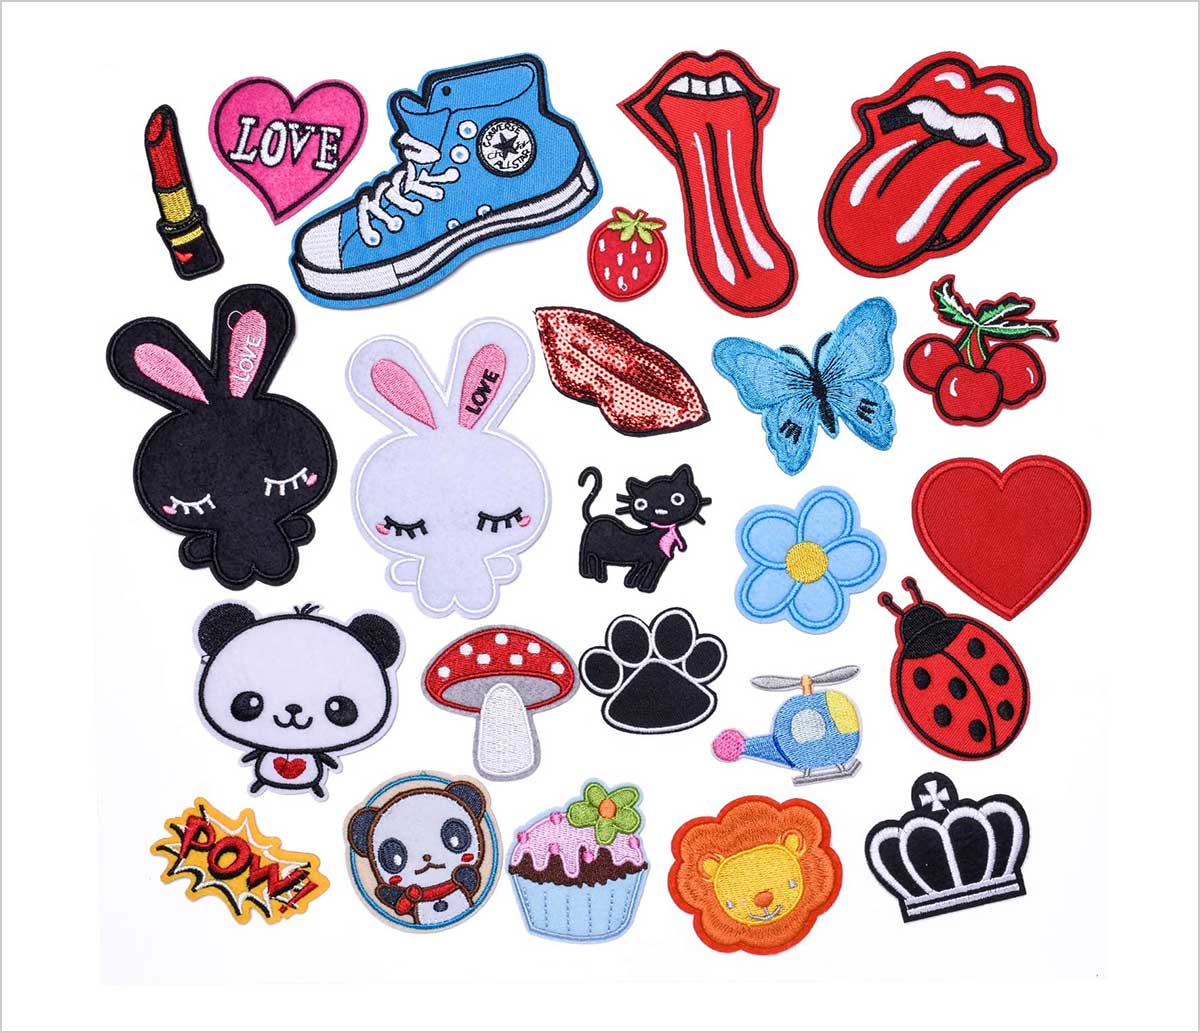 200+ Most Loved Cool Iron On Patches For Jackets, Backpacks, Jeans